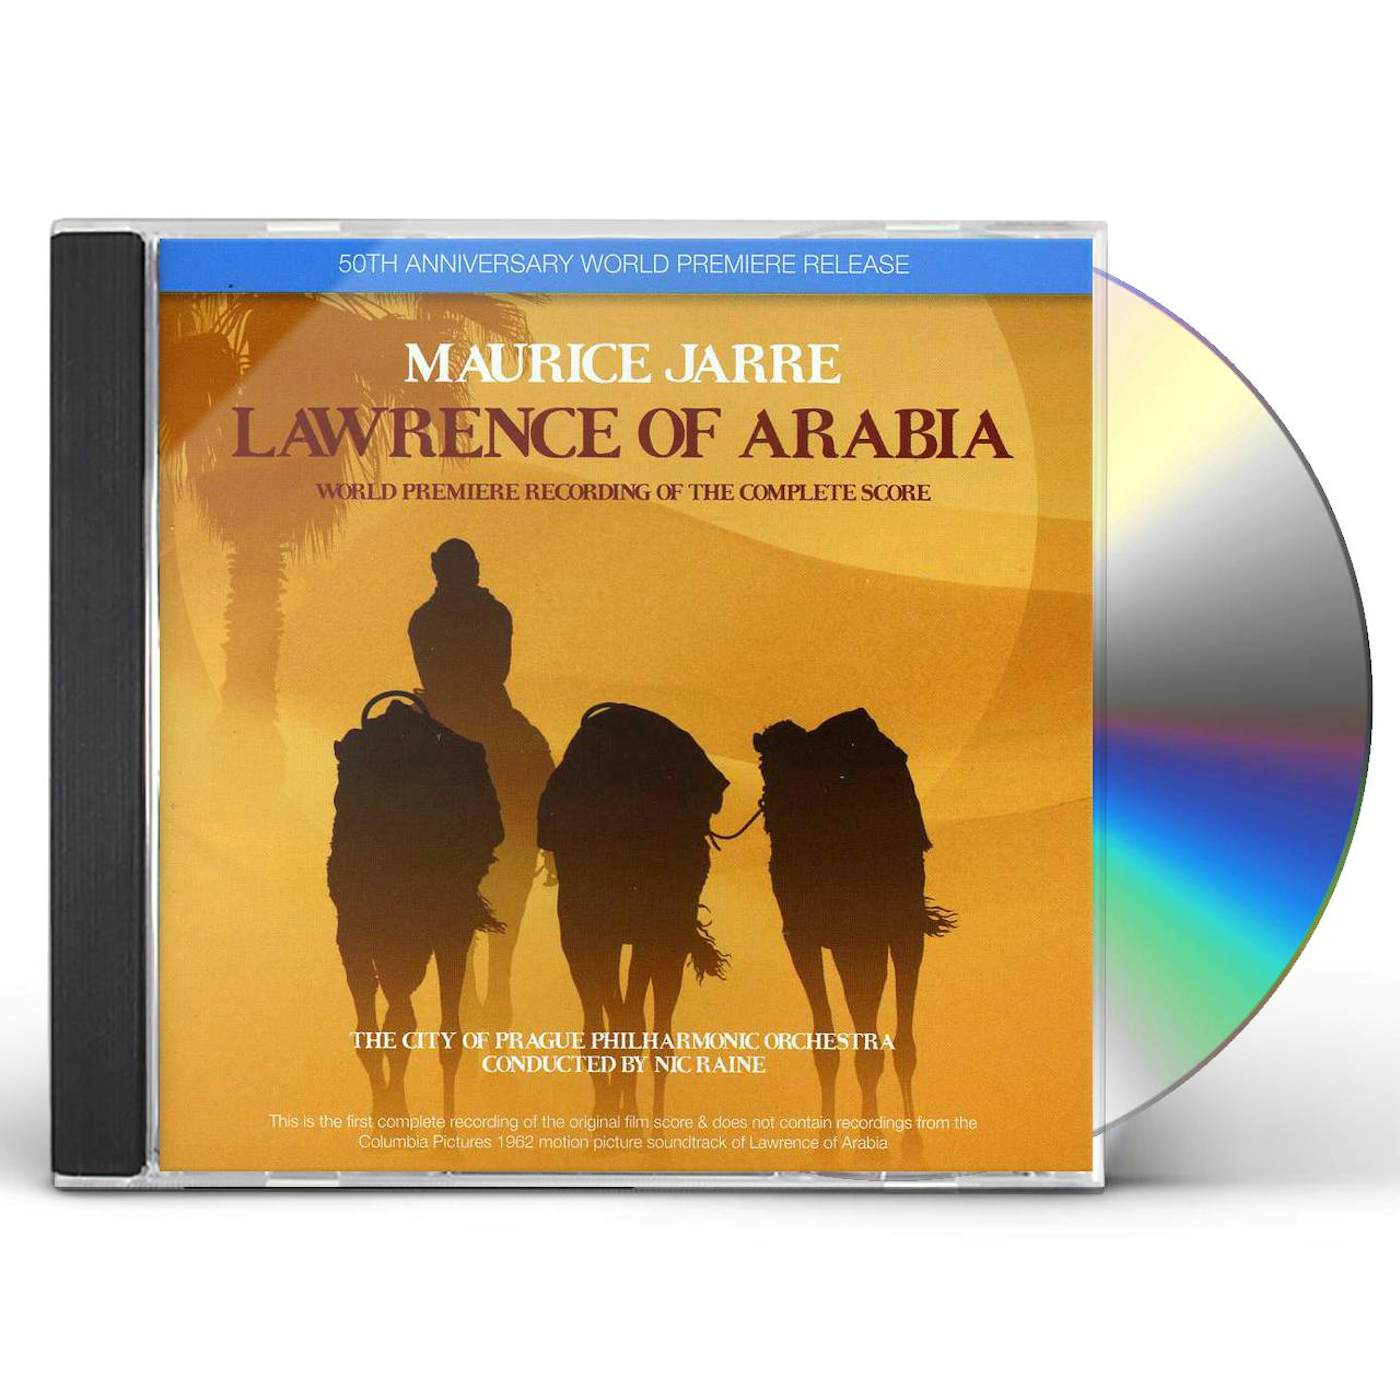 The City of Prague Philharmonic Orchestra LAWRENCE OF ARABIA CD